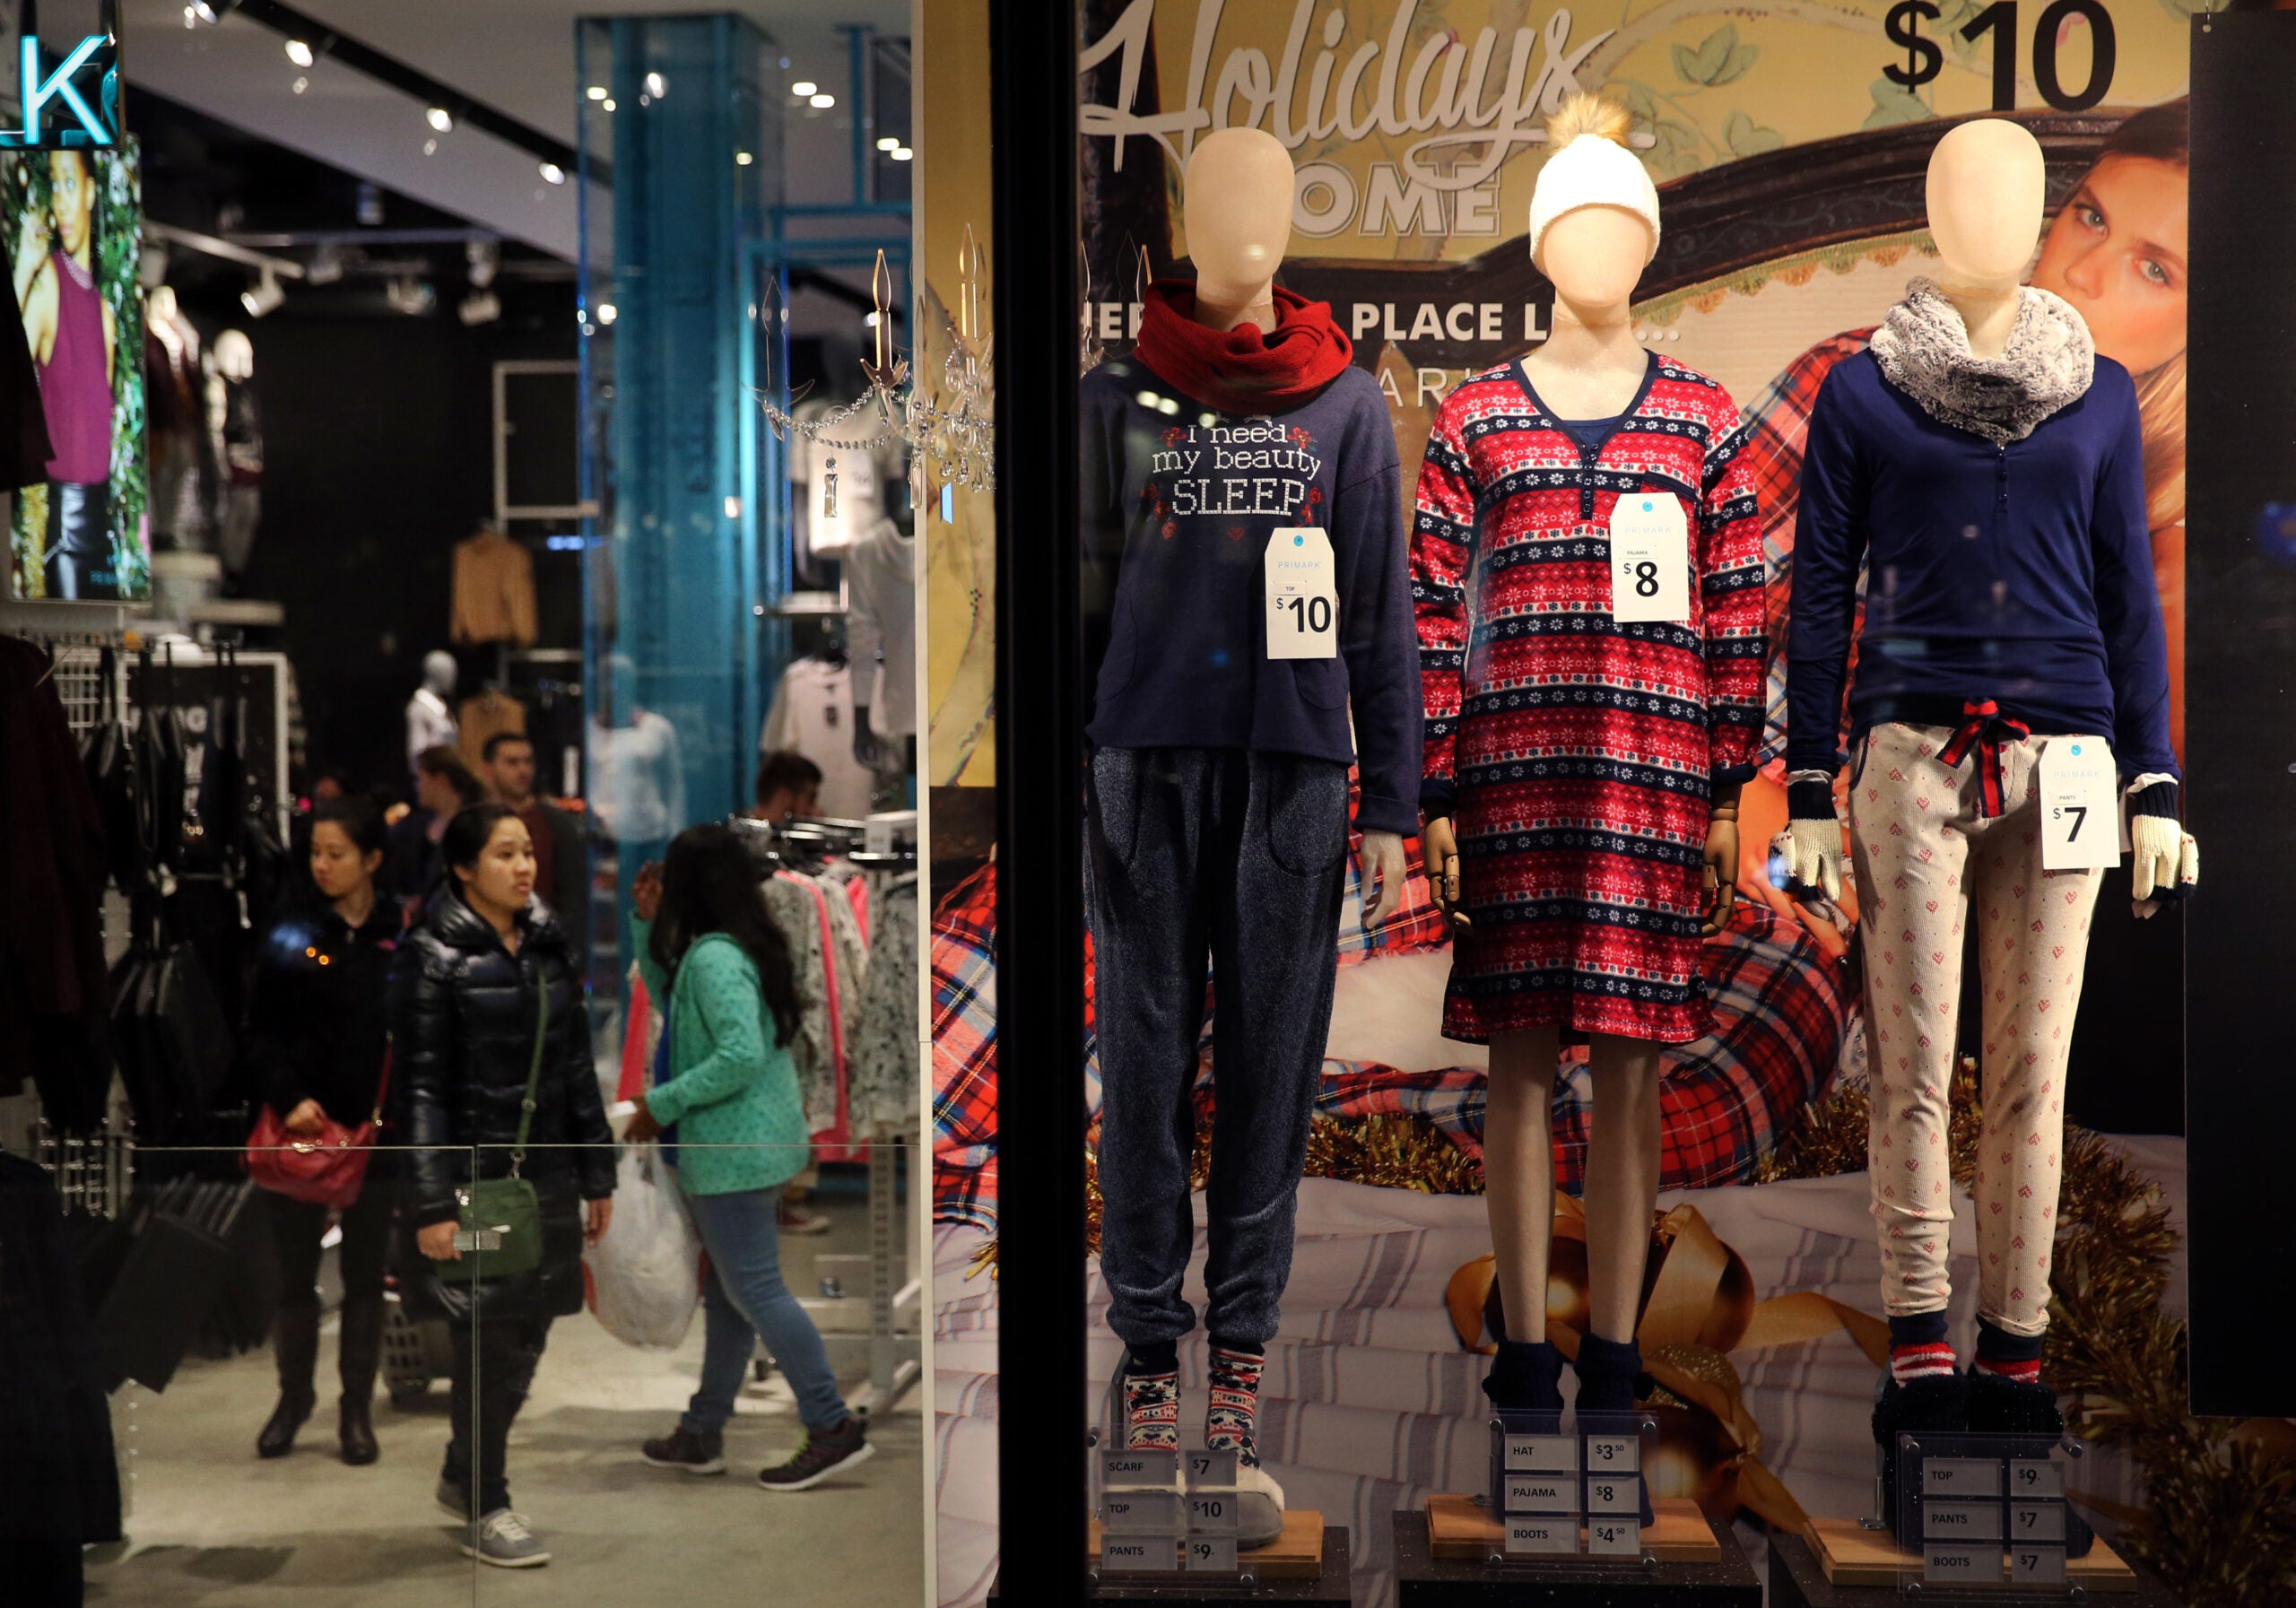 The most popular clothing stores in Boston, according to data